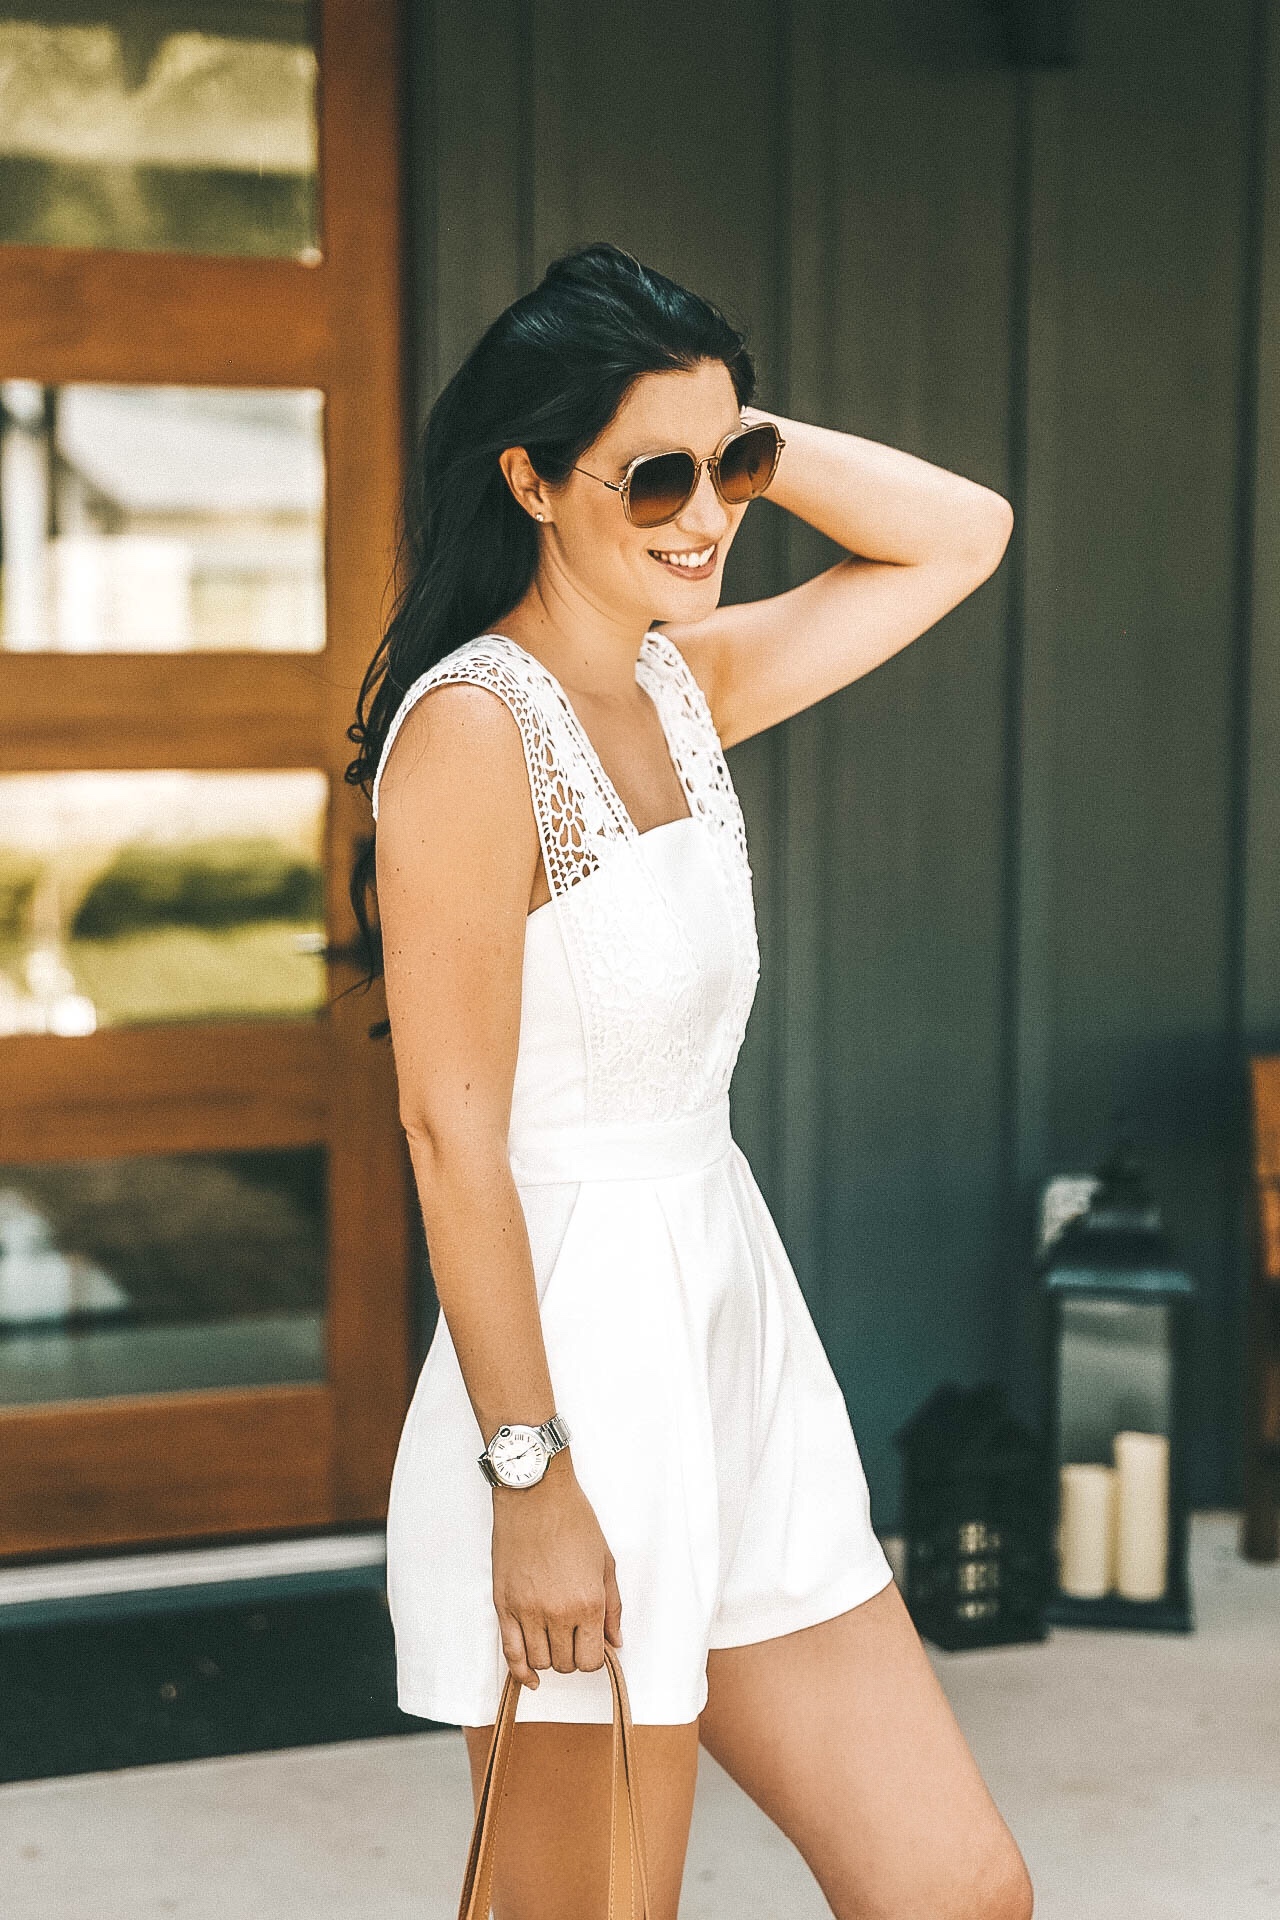 Affordable White Lace Romper for Summer | Chicwish Romper | romper style tips | how to wear a romper || Dressed to Kill #summerfashion #fashion #style #outfits #summeroutfits #romper #dtkaustin - {Chicwish White Lace Romper + Giveaway} featured by popular Austin fashion blogger, Dressed to Kill